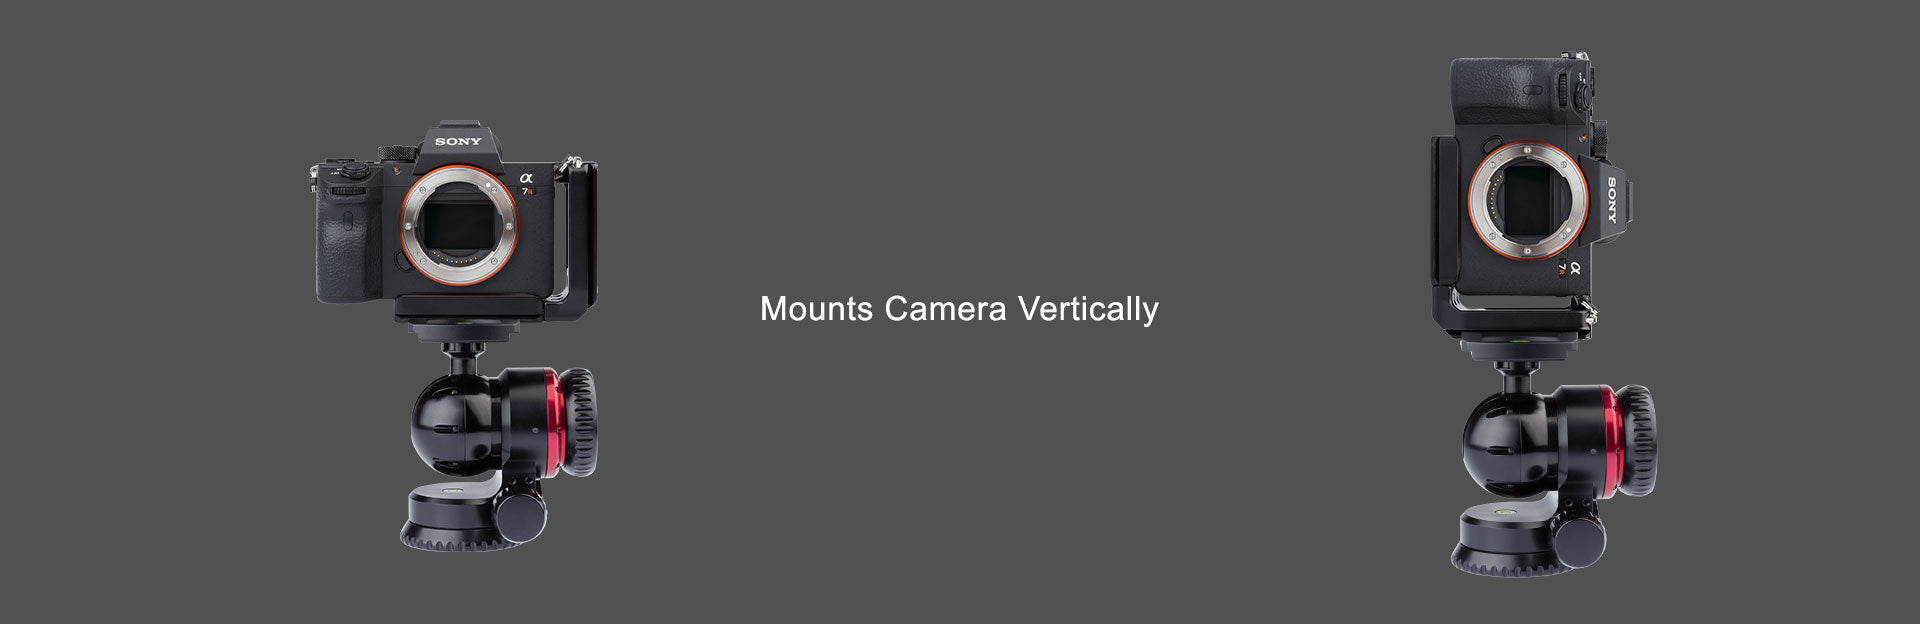 Mounts your camera Vertically